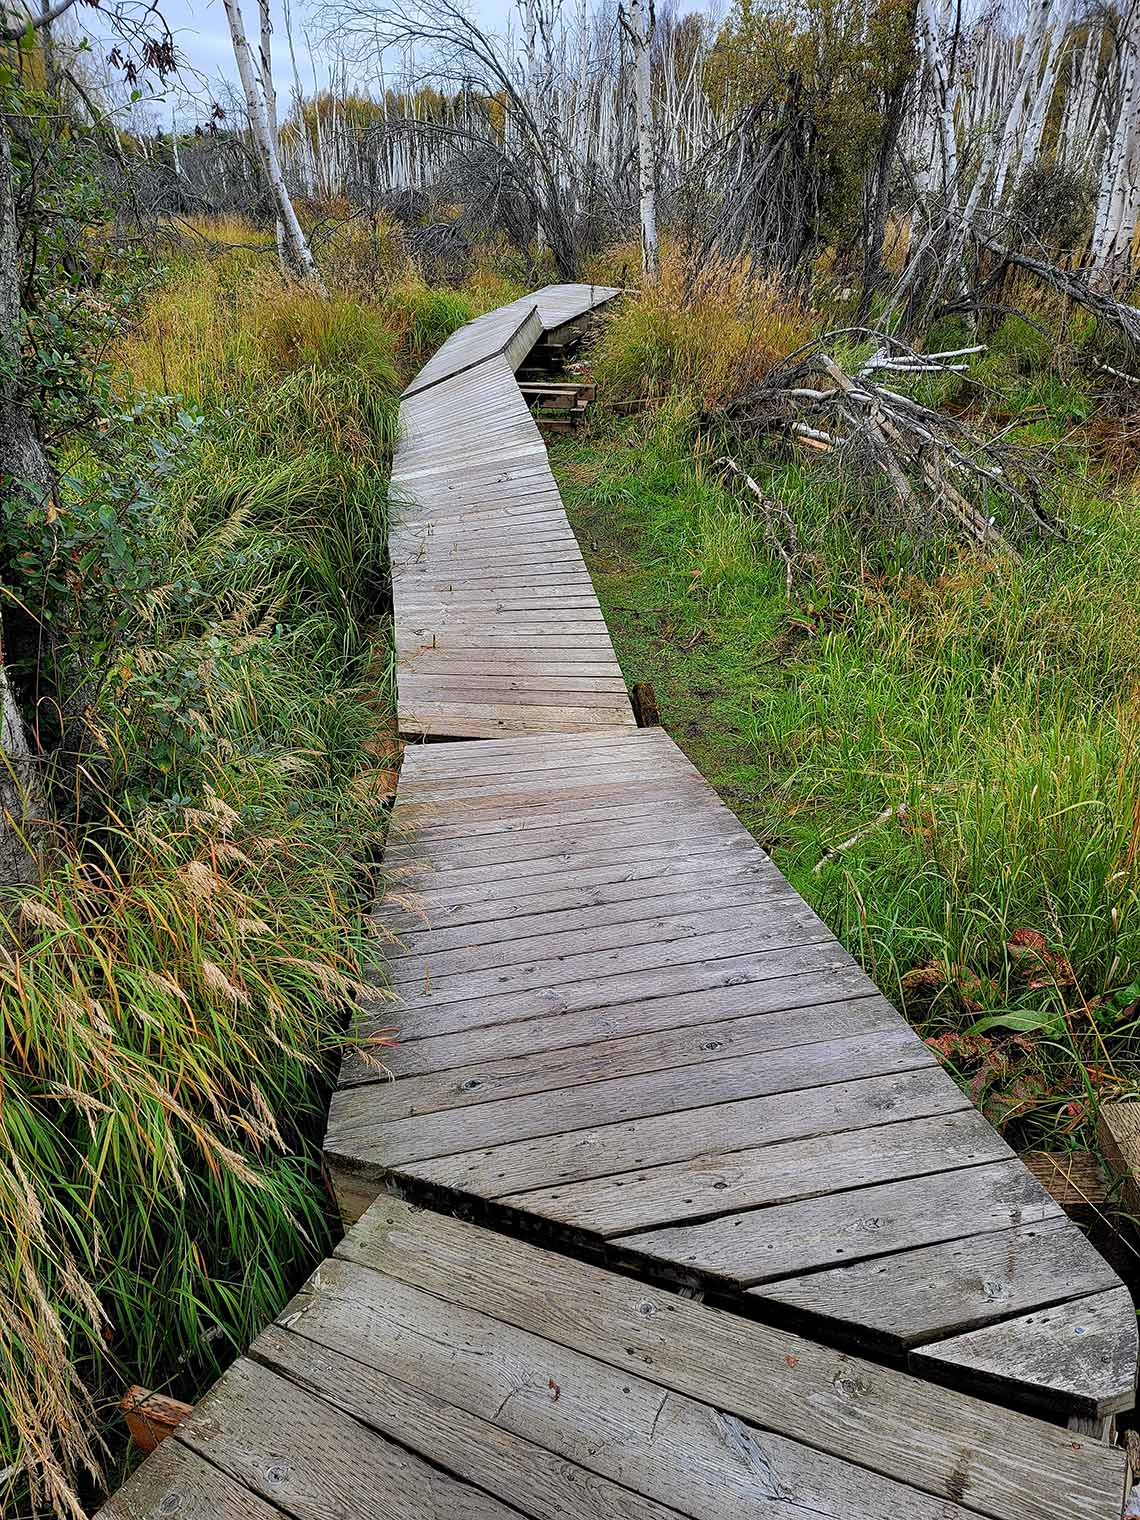 An Alaskan boardwalk pushed up by permafrost melt and tree throw